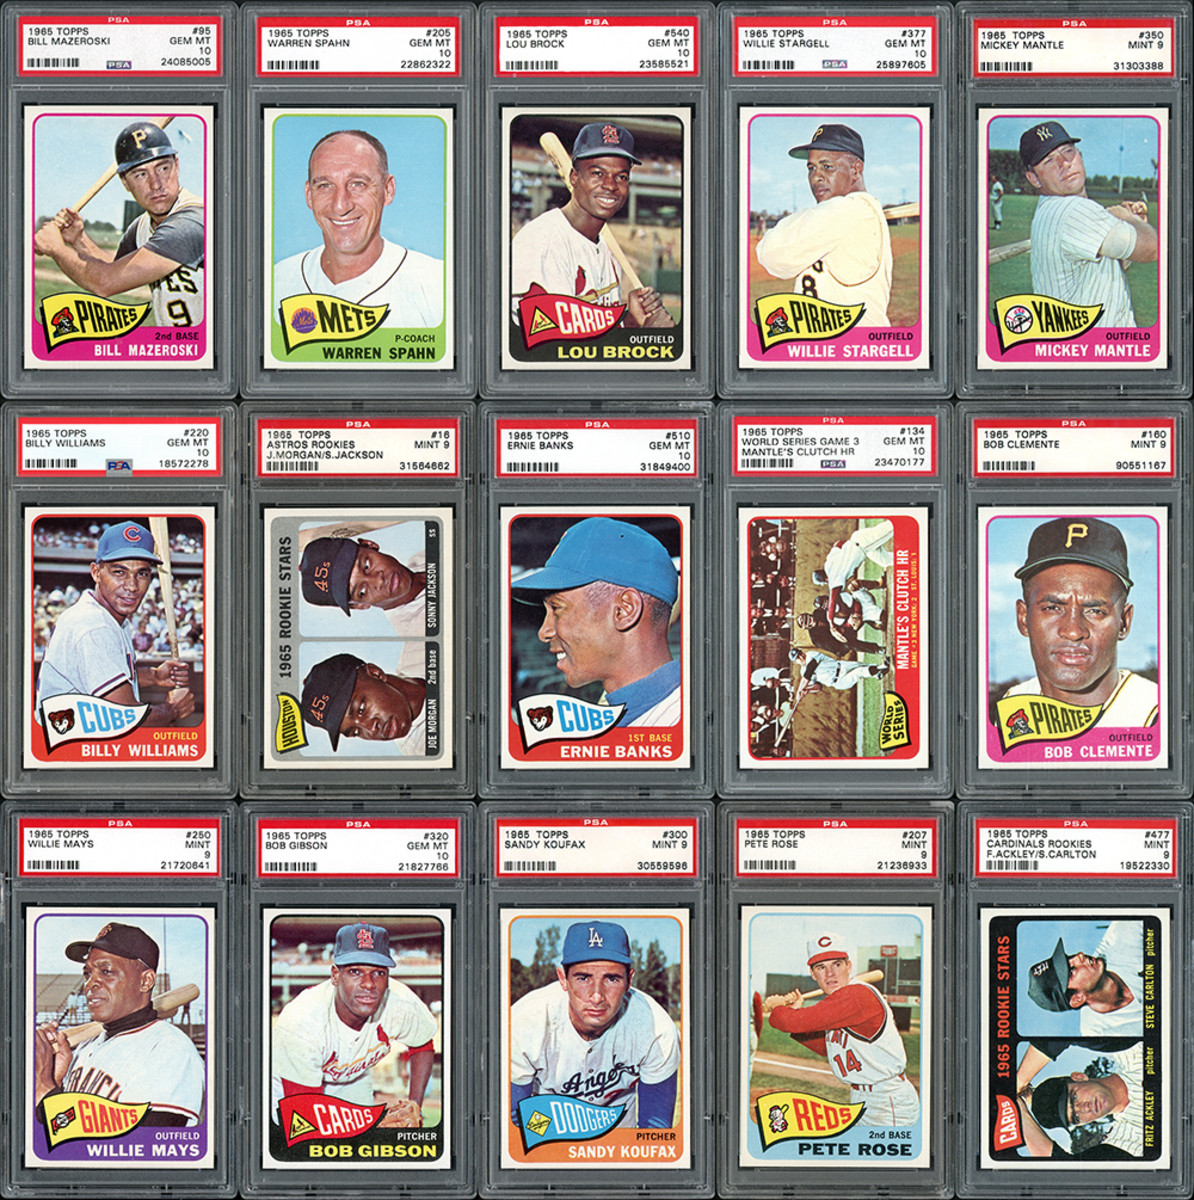 A 1965 Topps complete set that sold for a total of $349,159 at Mile High Card Co.